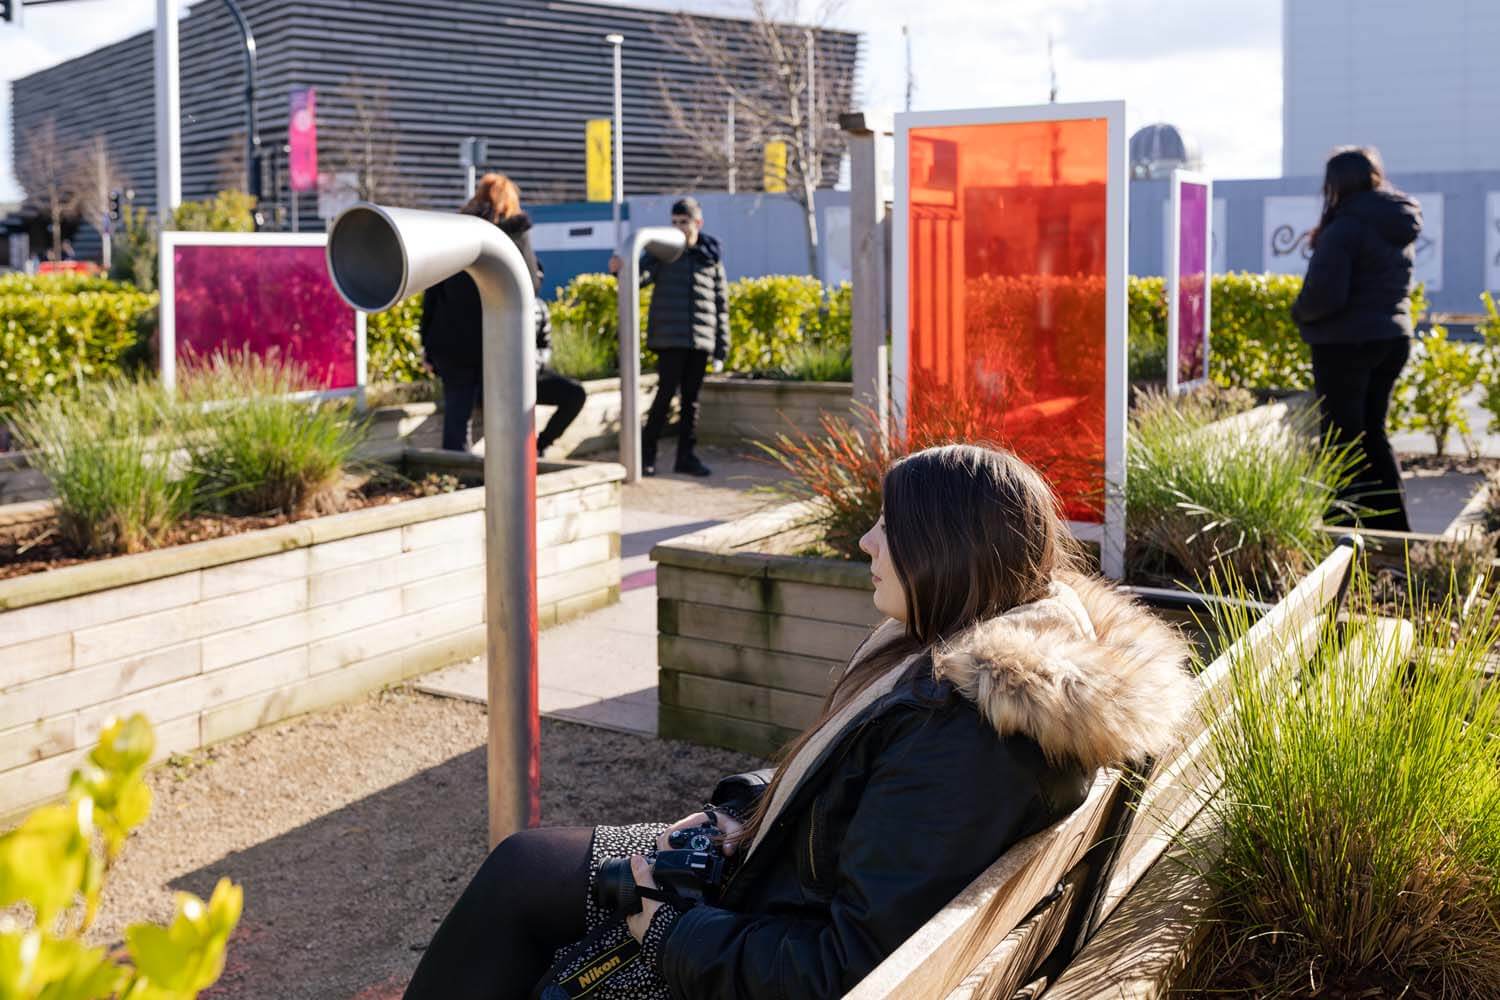 A woman wearing a coat sits on a bench. She is in a garden filled with public artworks.